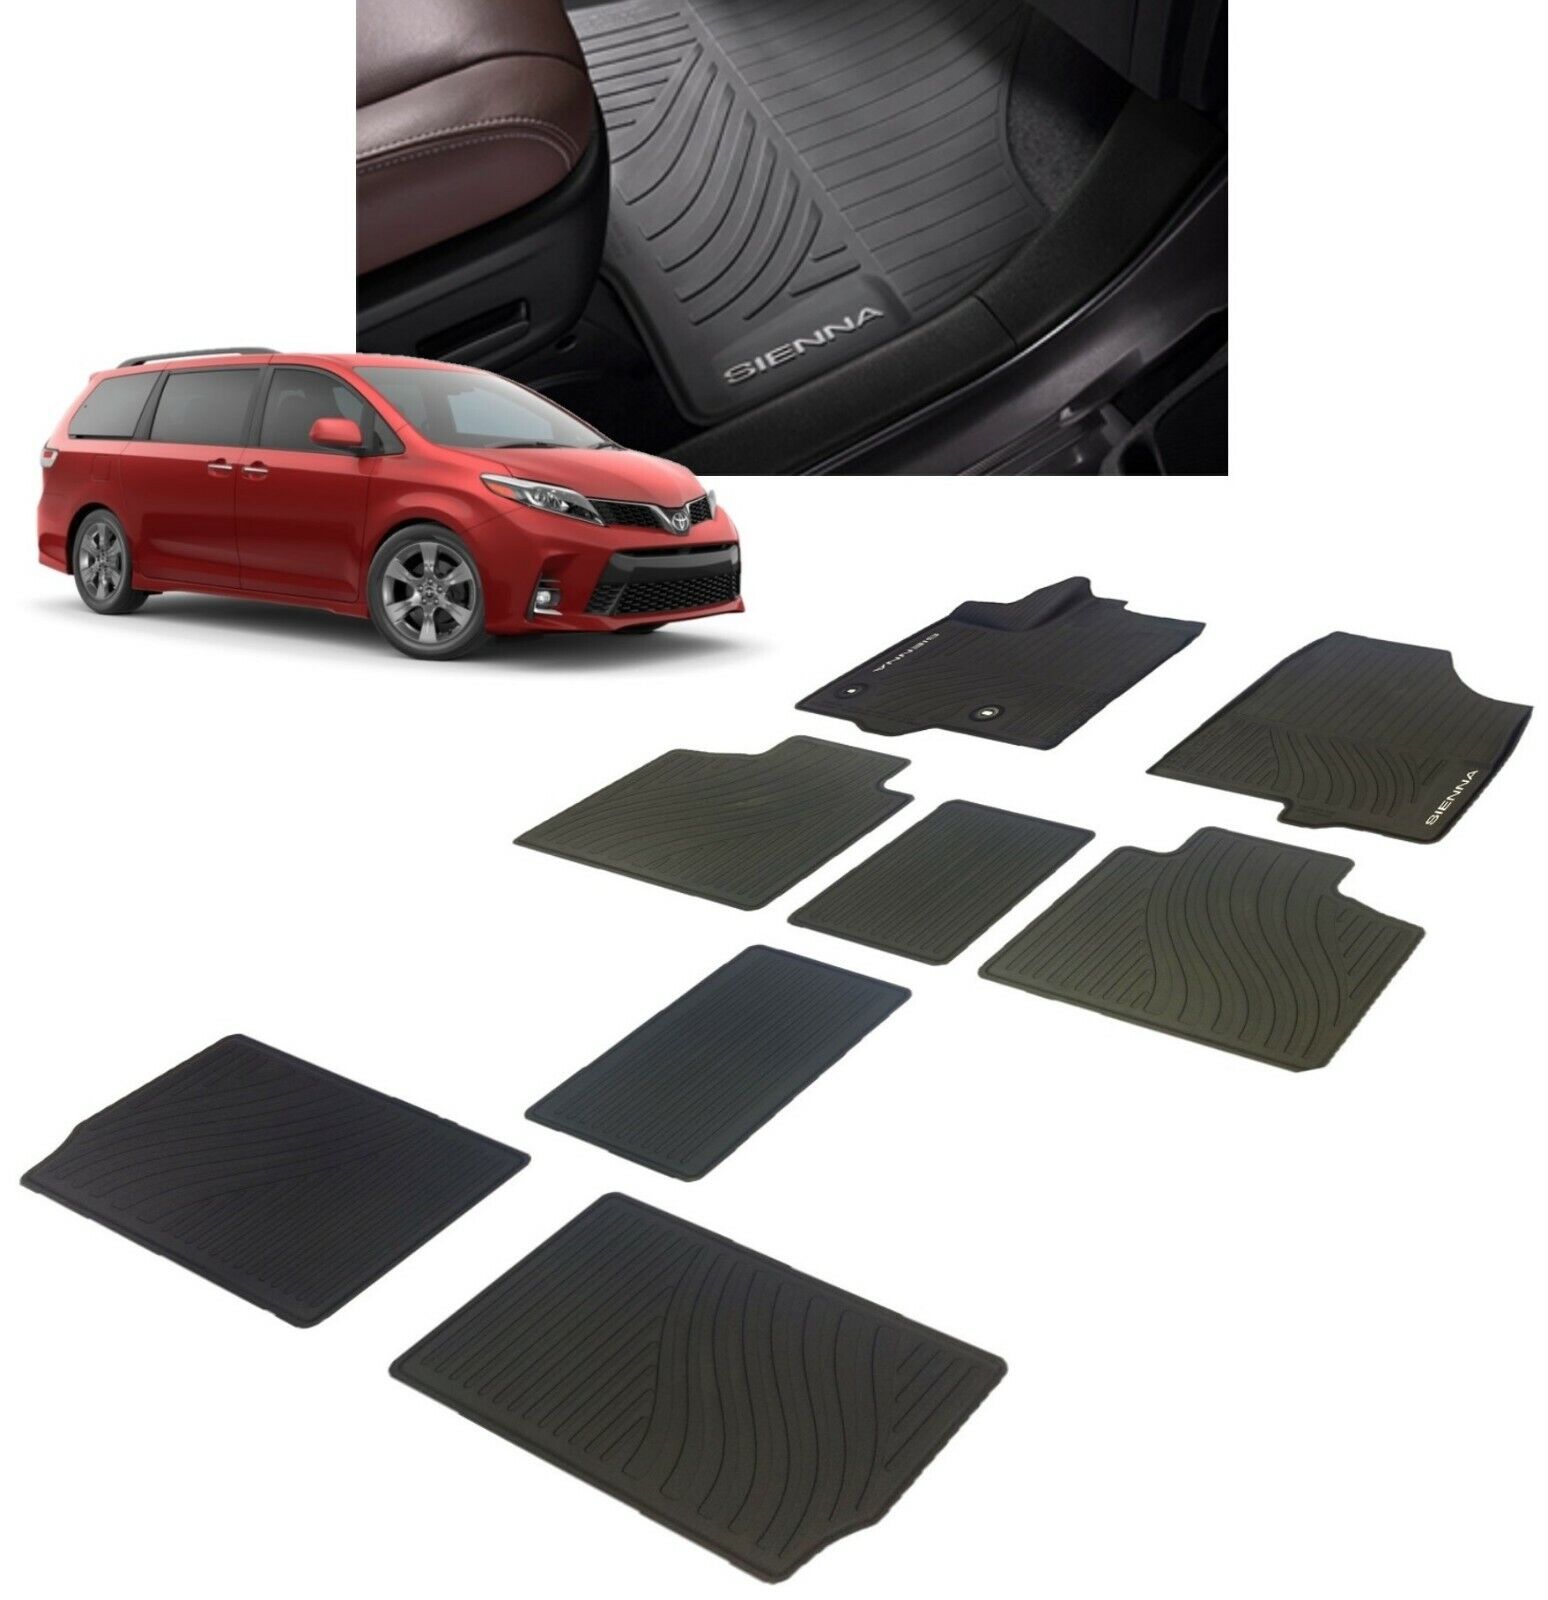 2013-2020 Sienna Floor Mats All Weather Liners 8PC Genuine Toyota PT908-08170-02